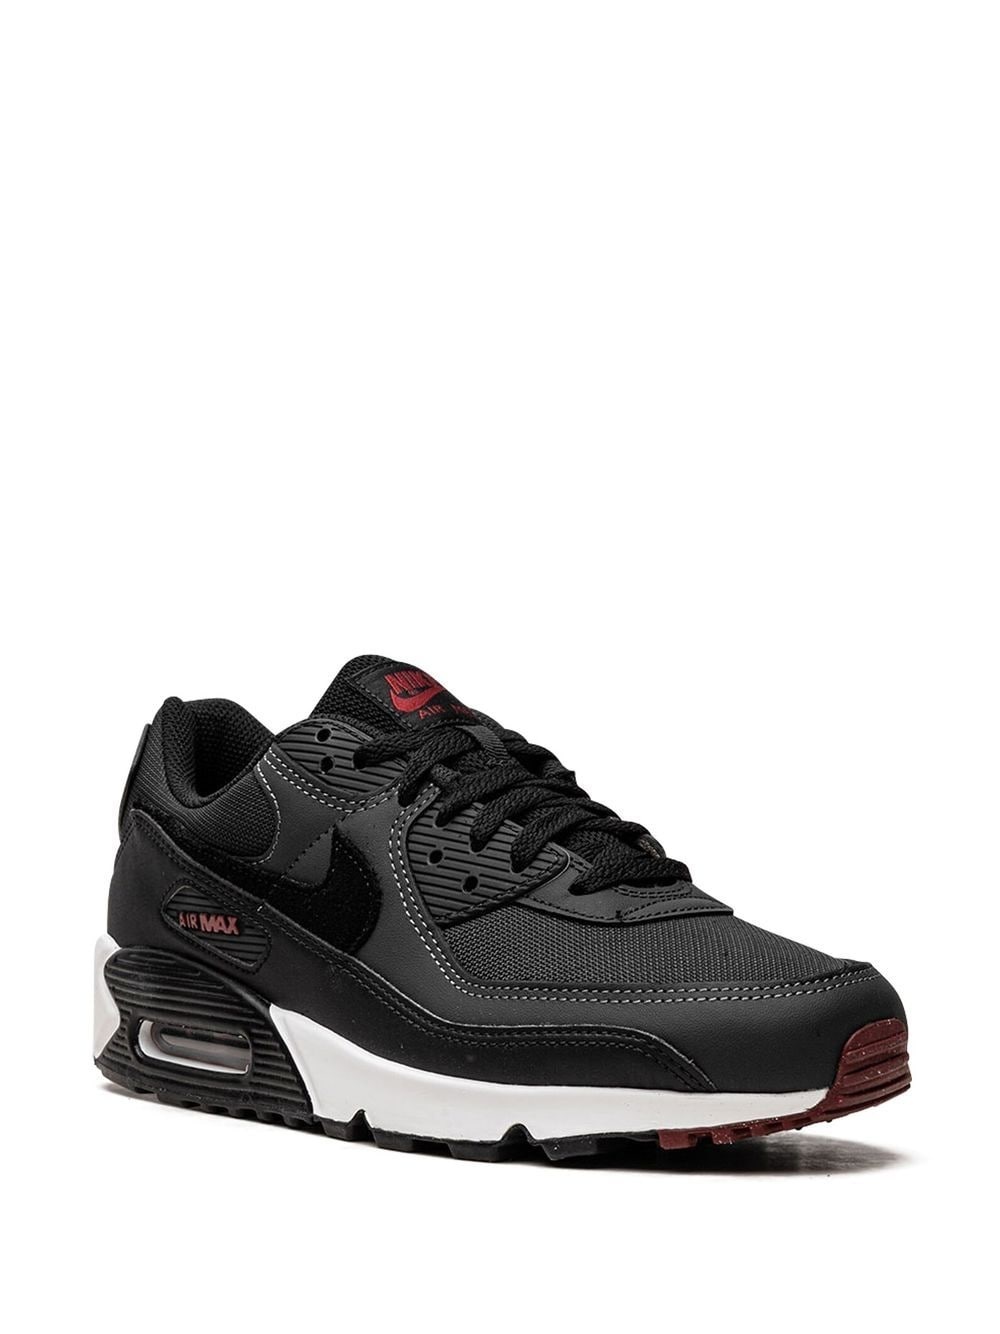 Air Max 90 "Anthracite Team Red" sneakers - 2